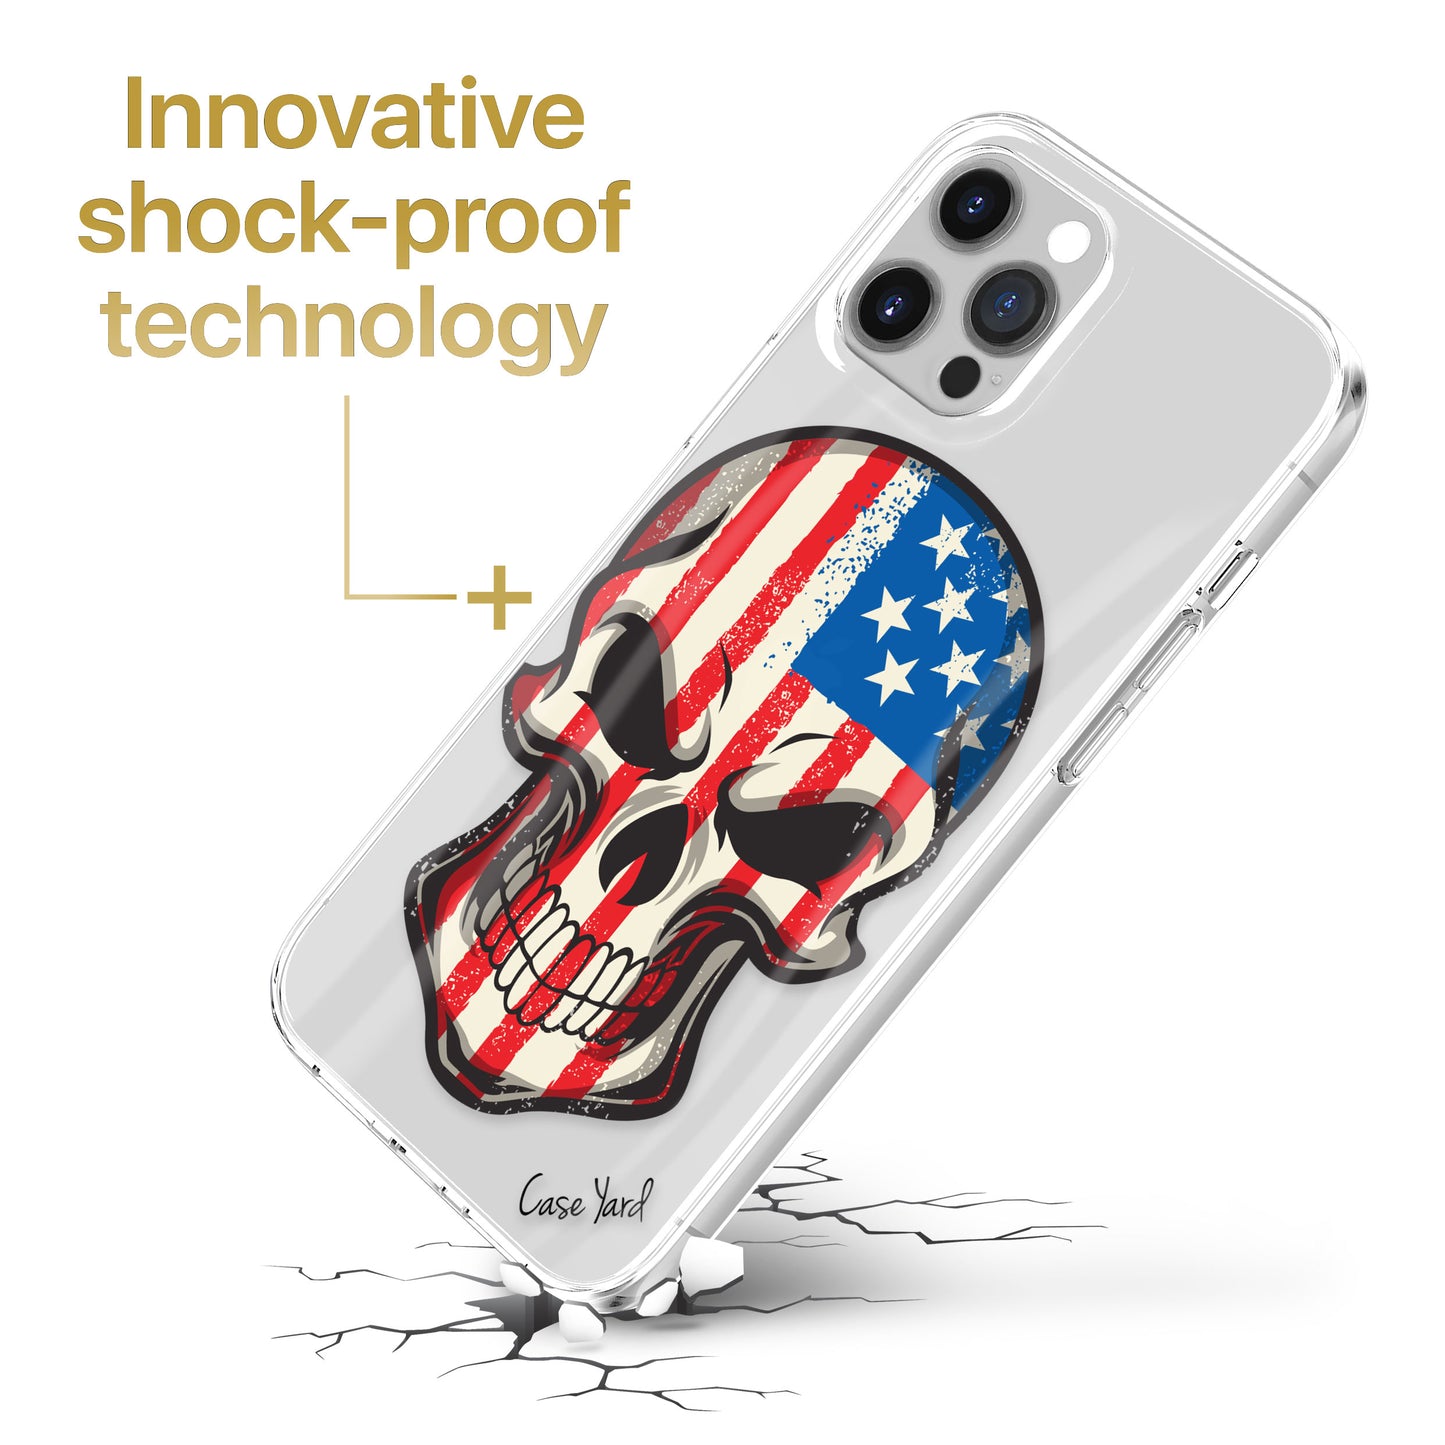 TPU Clear case with (US Skull) Design for iPhone & Samsung Phones